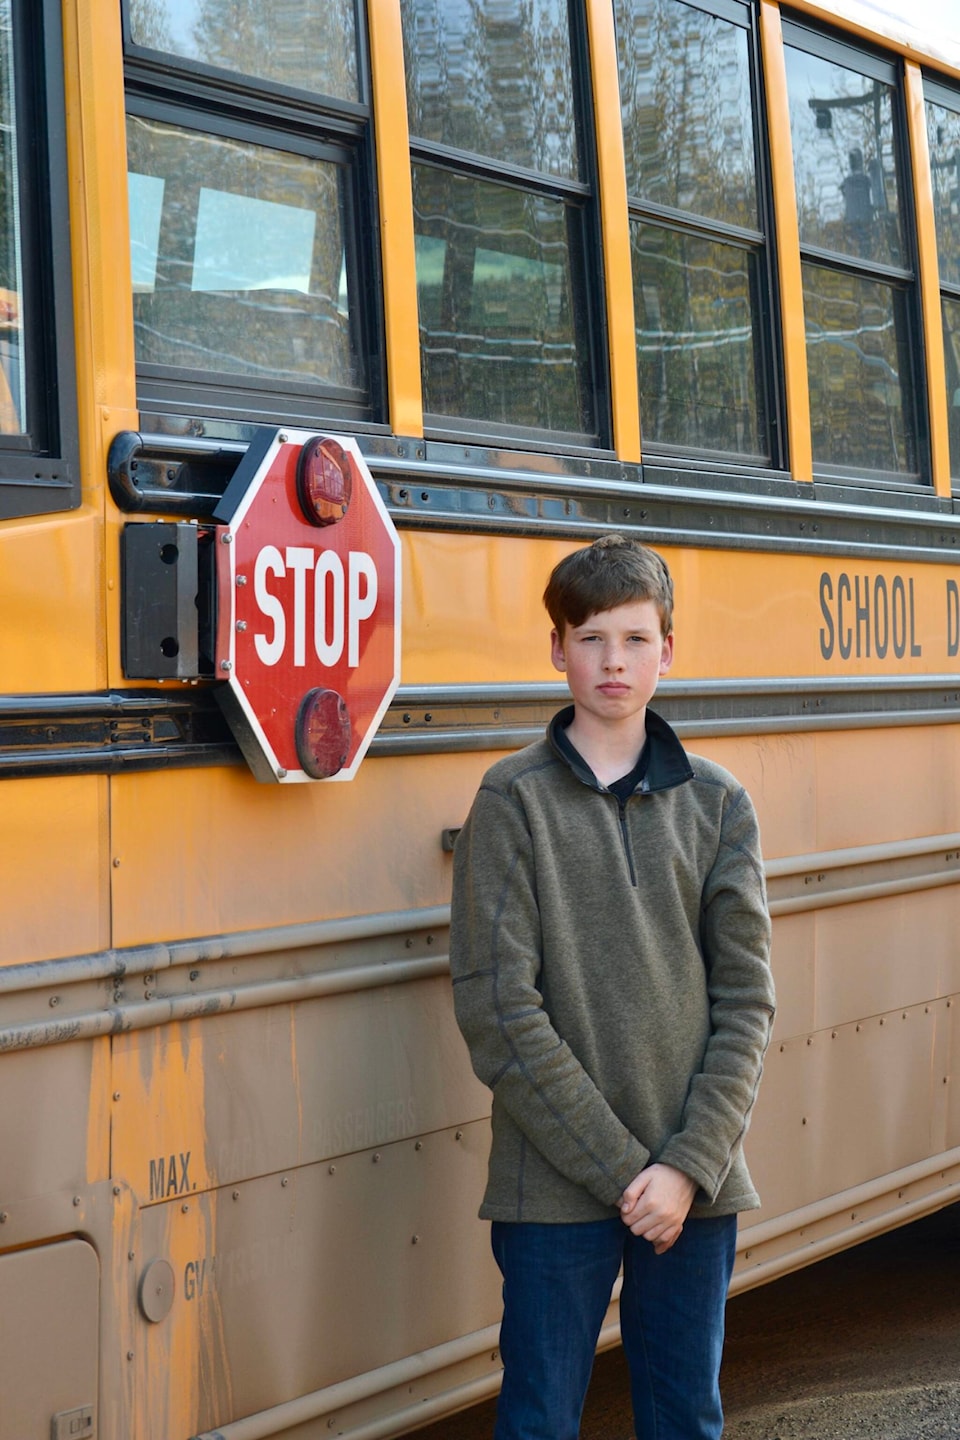 30515011_web1_220929-SIN-BREAKING-Two-quick-thinking-teens-stop-bus-and-call-for-medial-help-bus-photos-with-Jimmy_2